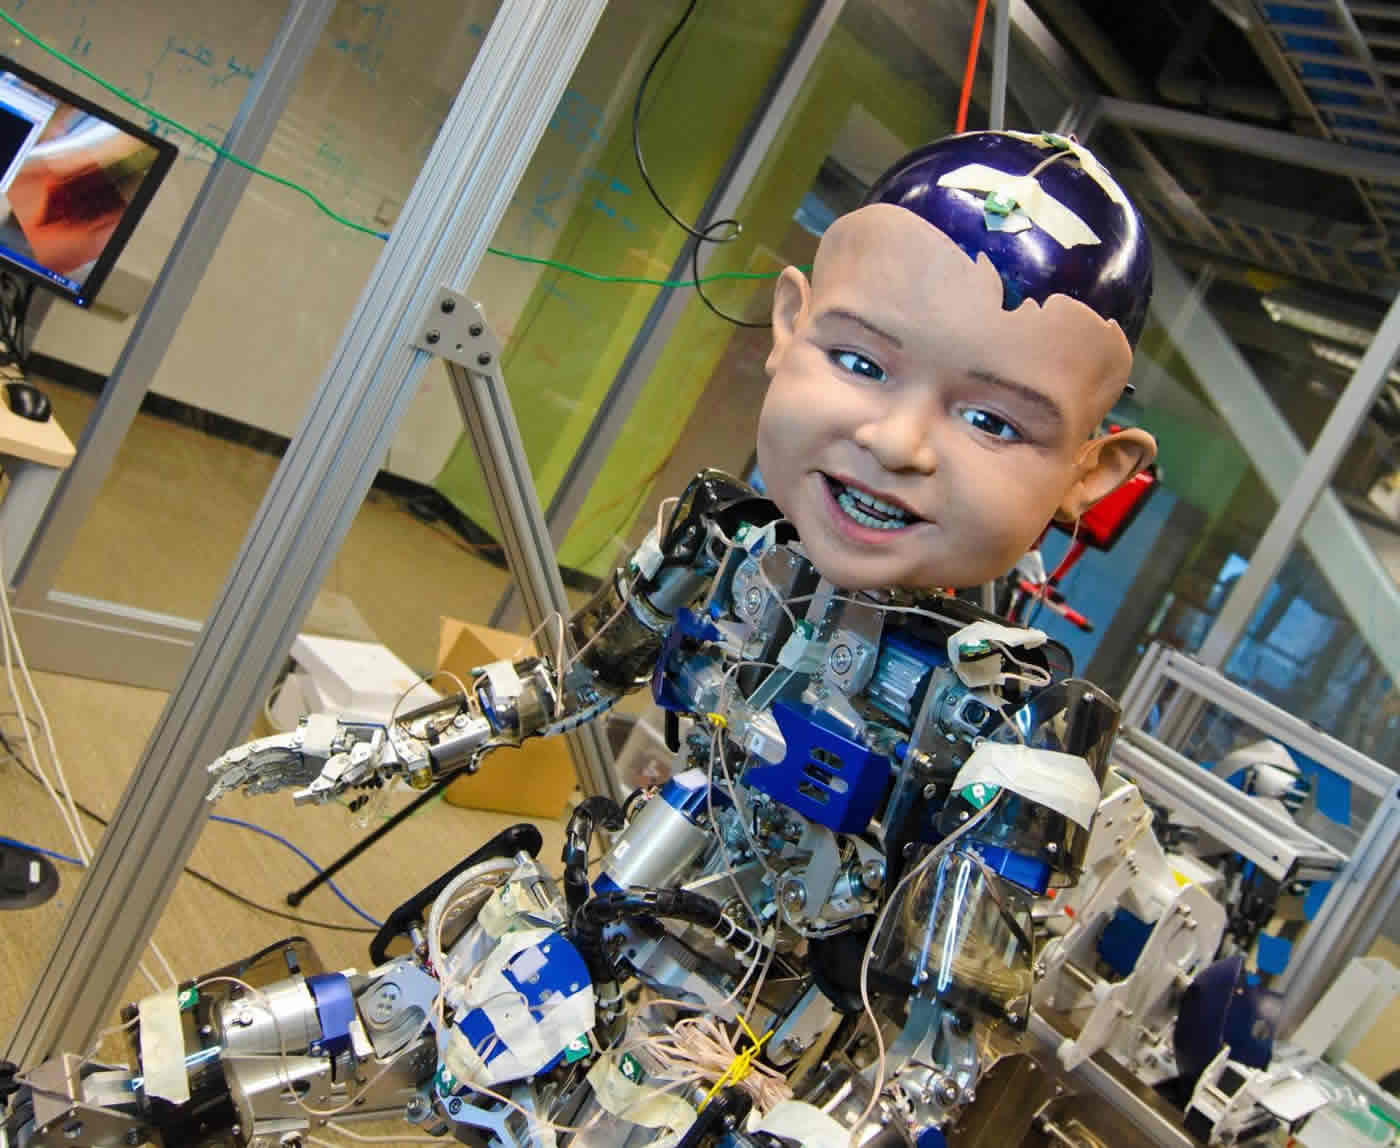 Robotic Toddler Helps Researchers Confirm Babies Their Smiles to Make Mom in Return - Neuroscience News